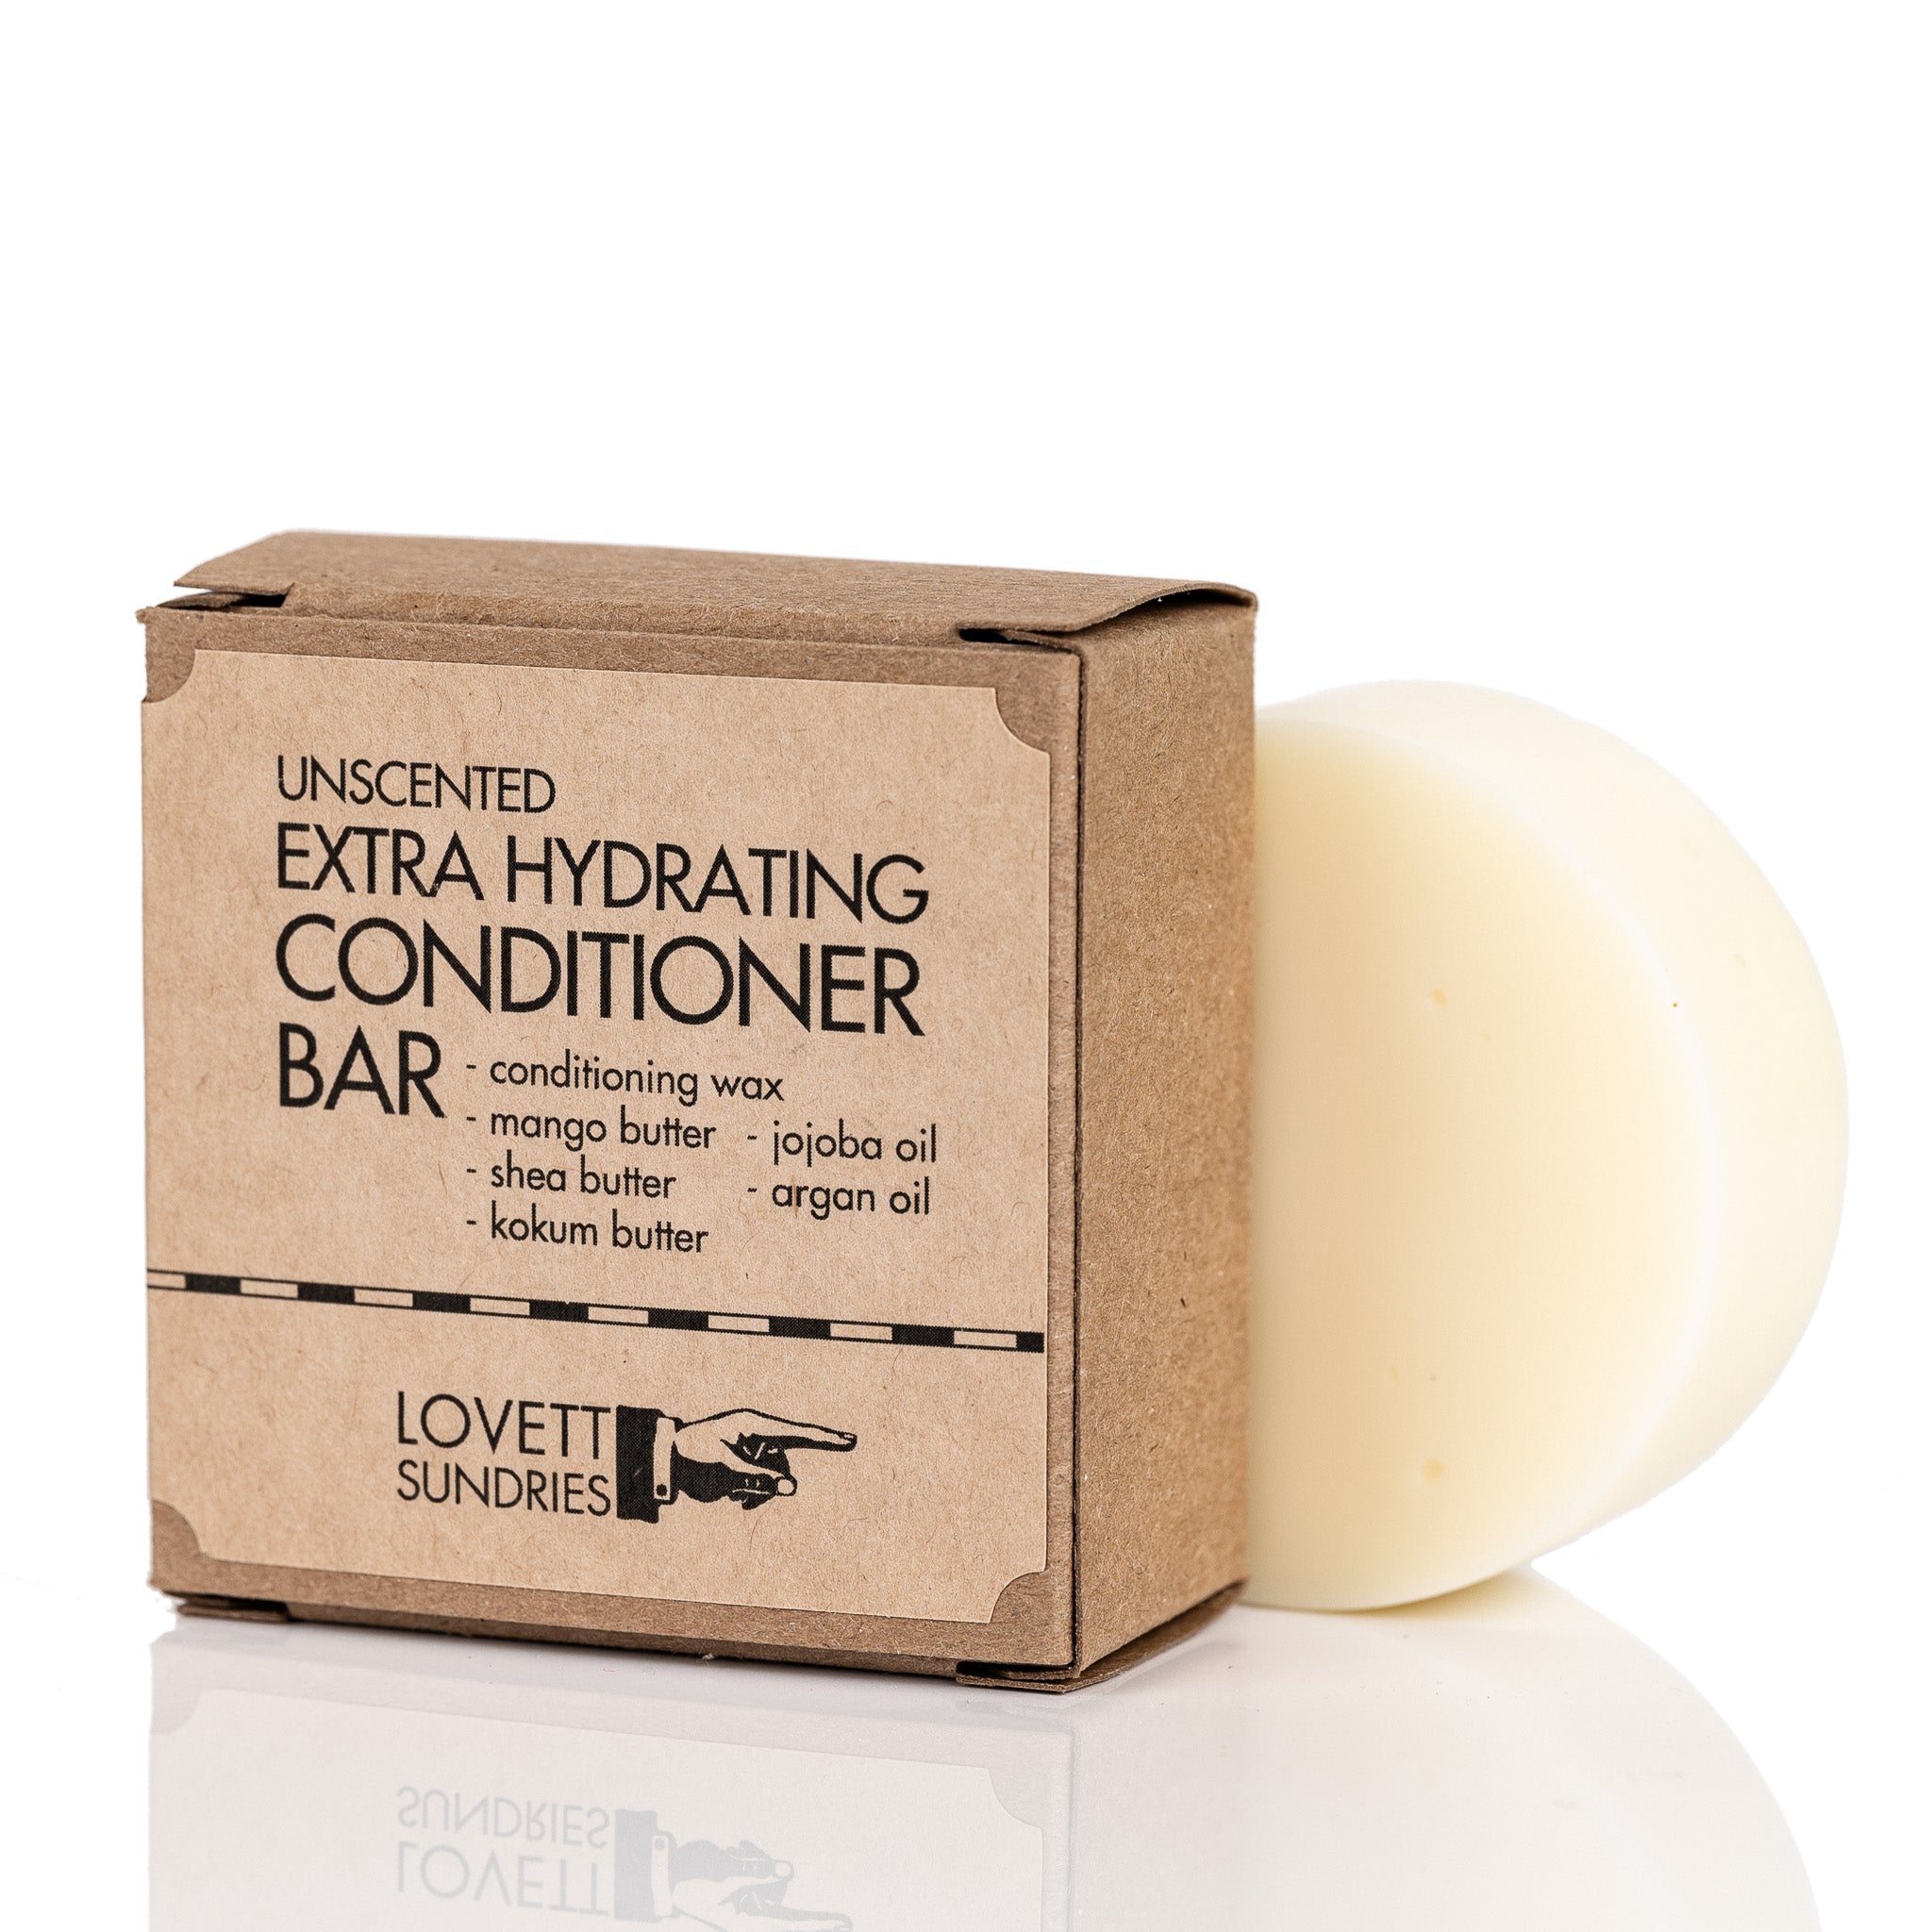 A container with an unscented extra hydrating conditioner bar.